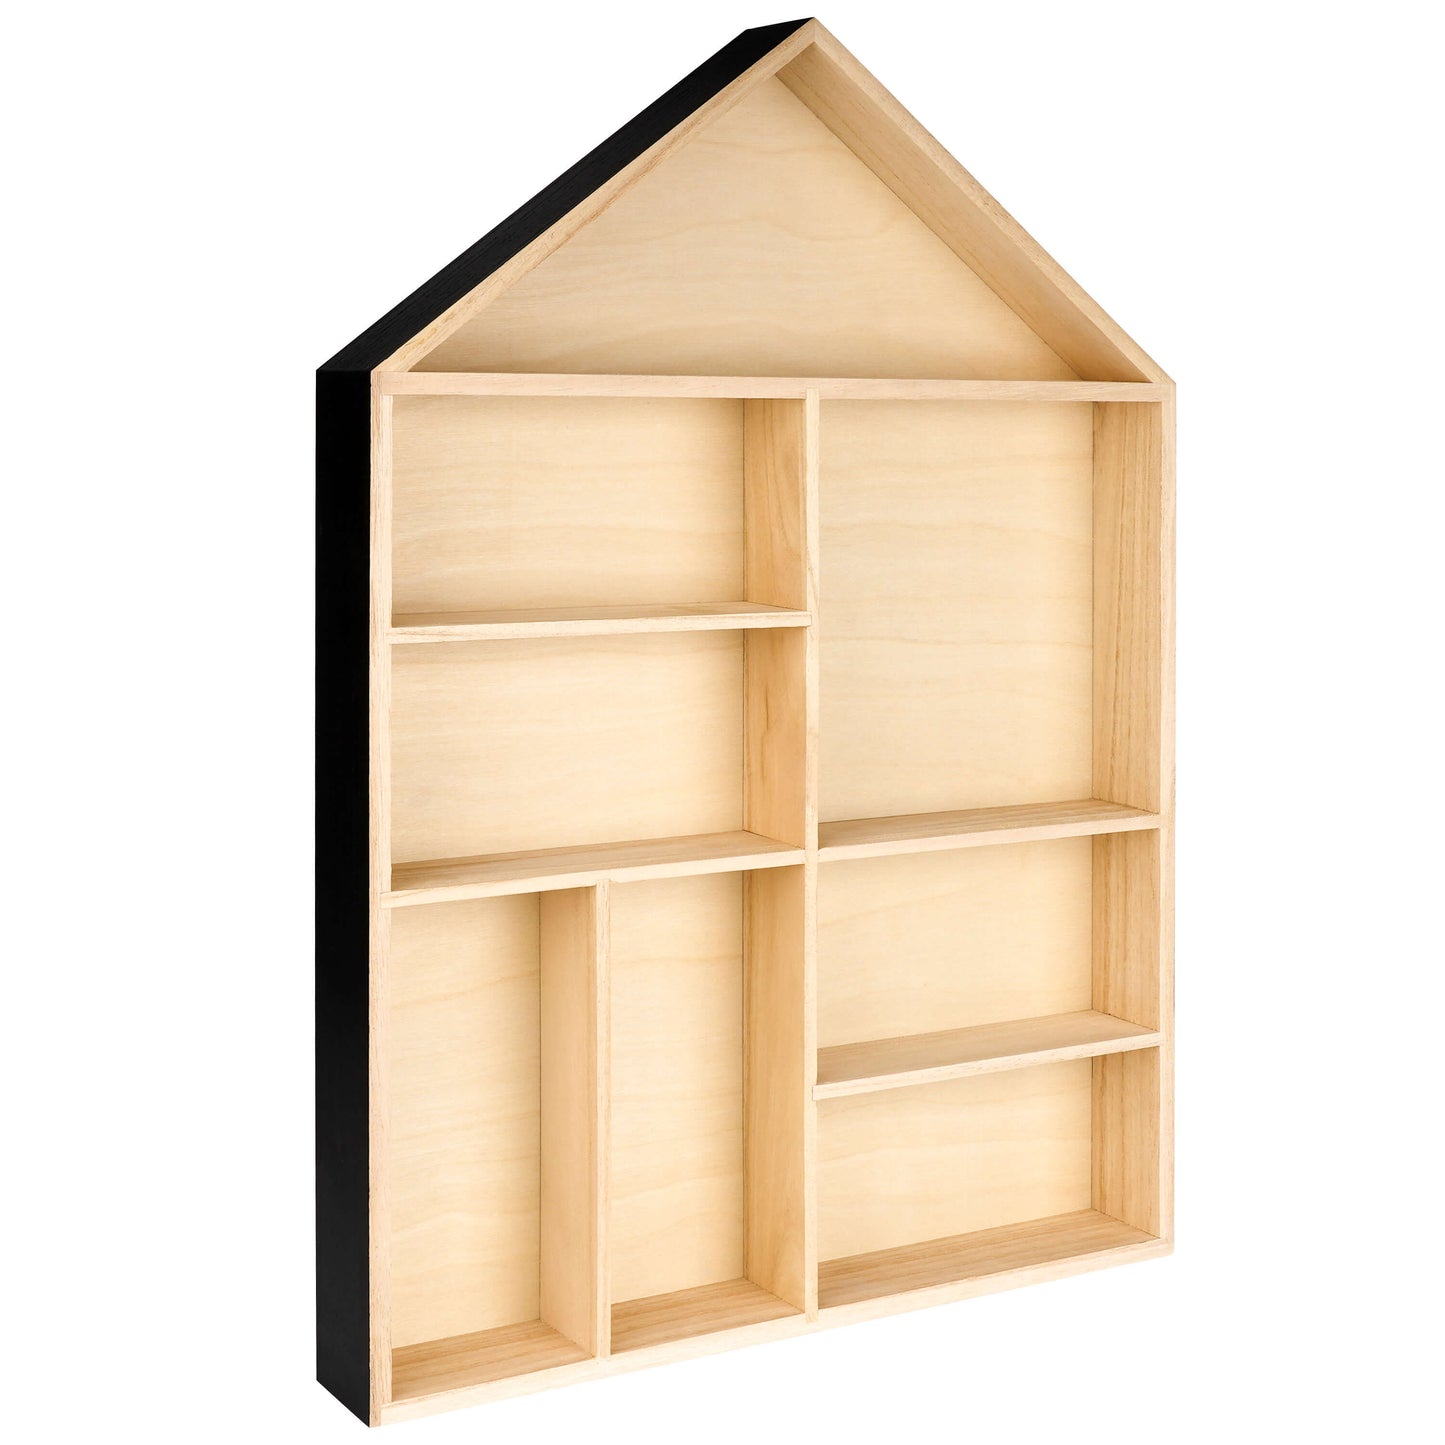 House shaped wooden toy display shelf with a black finish on the outside ( Empty, side view)